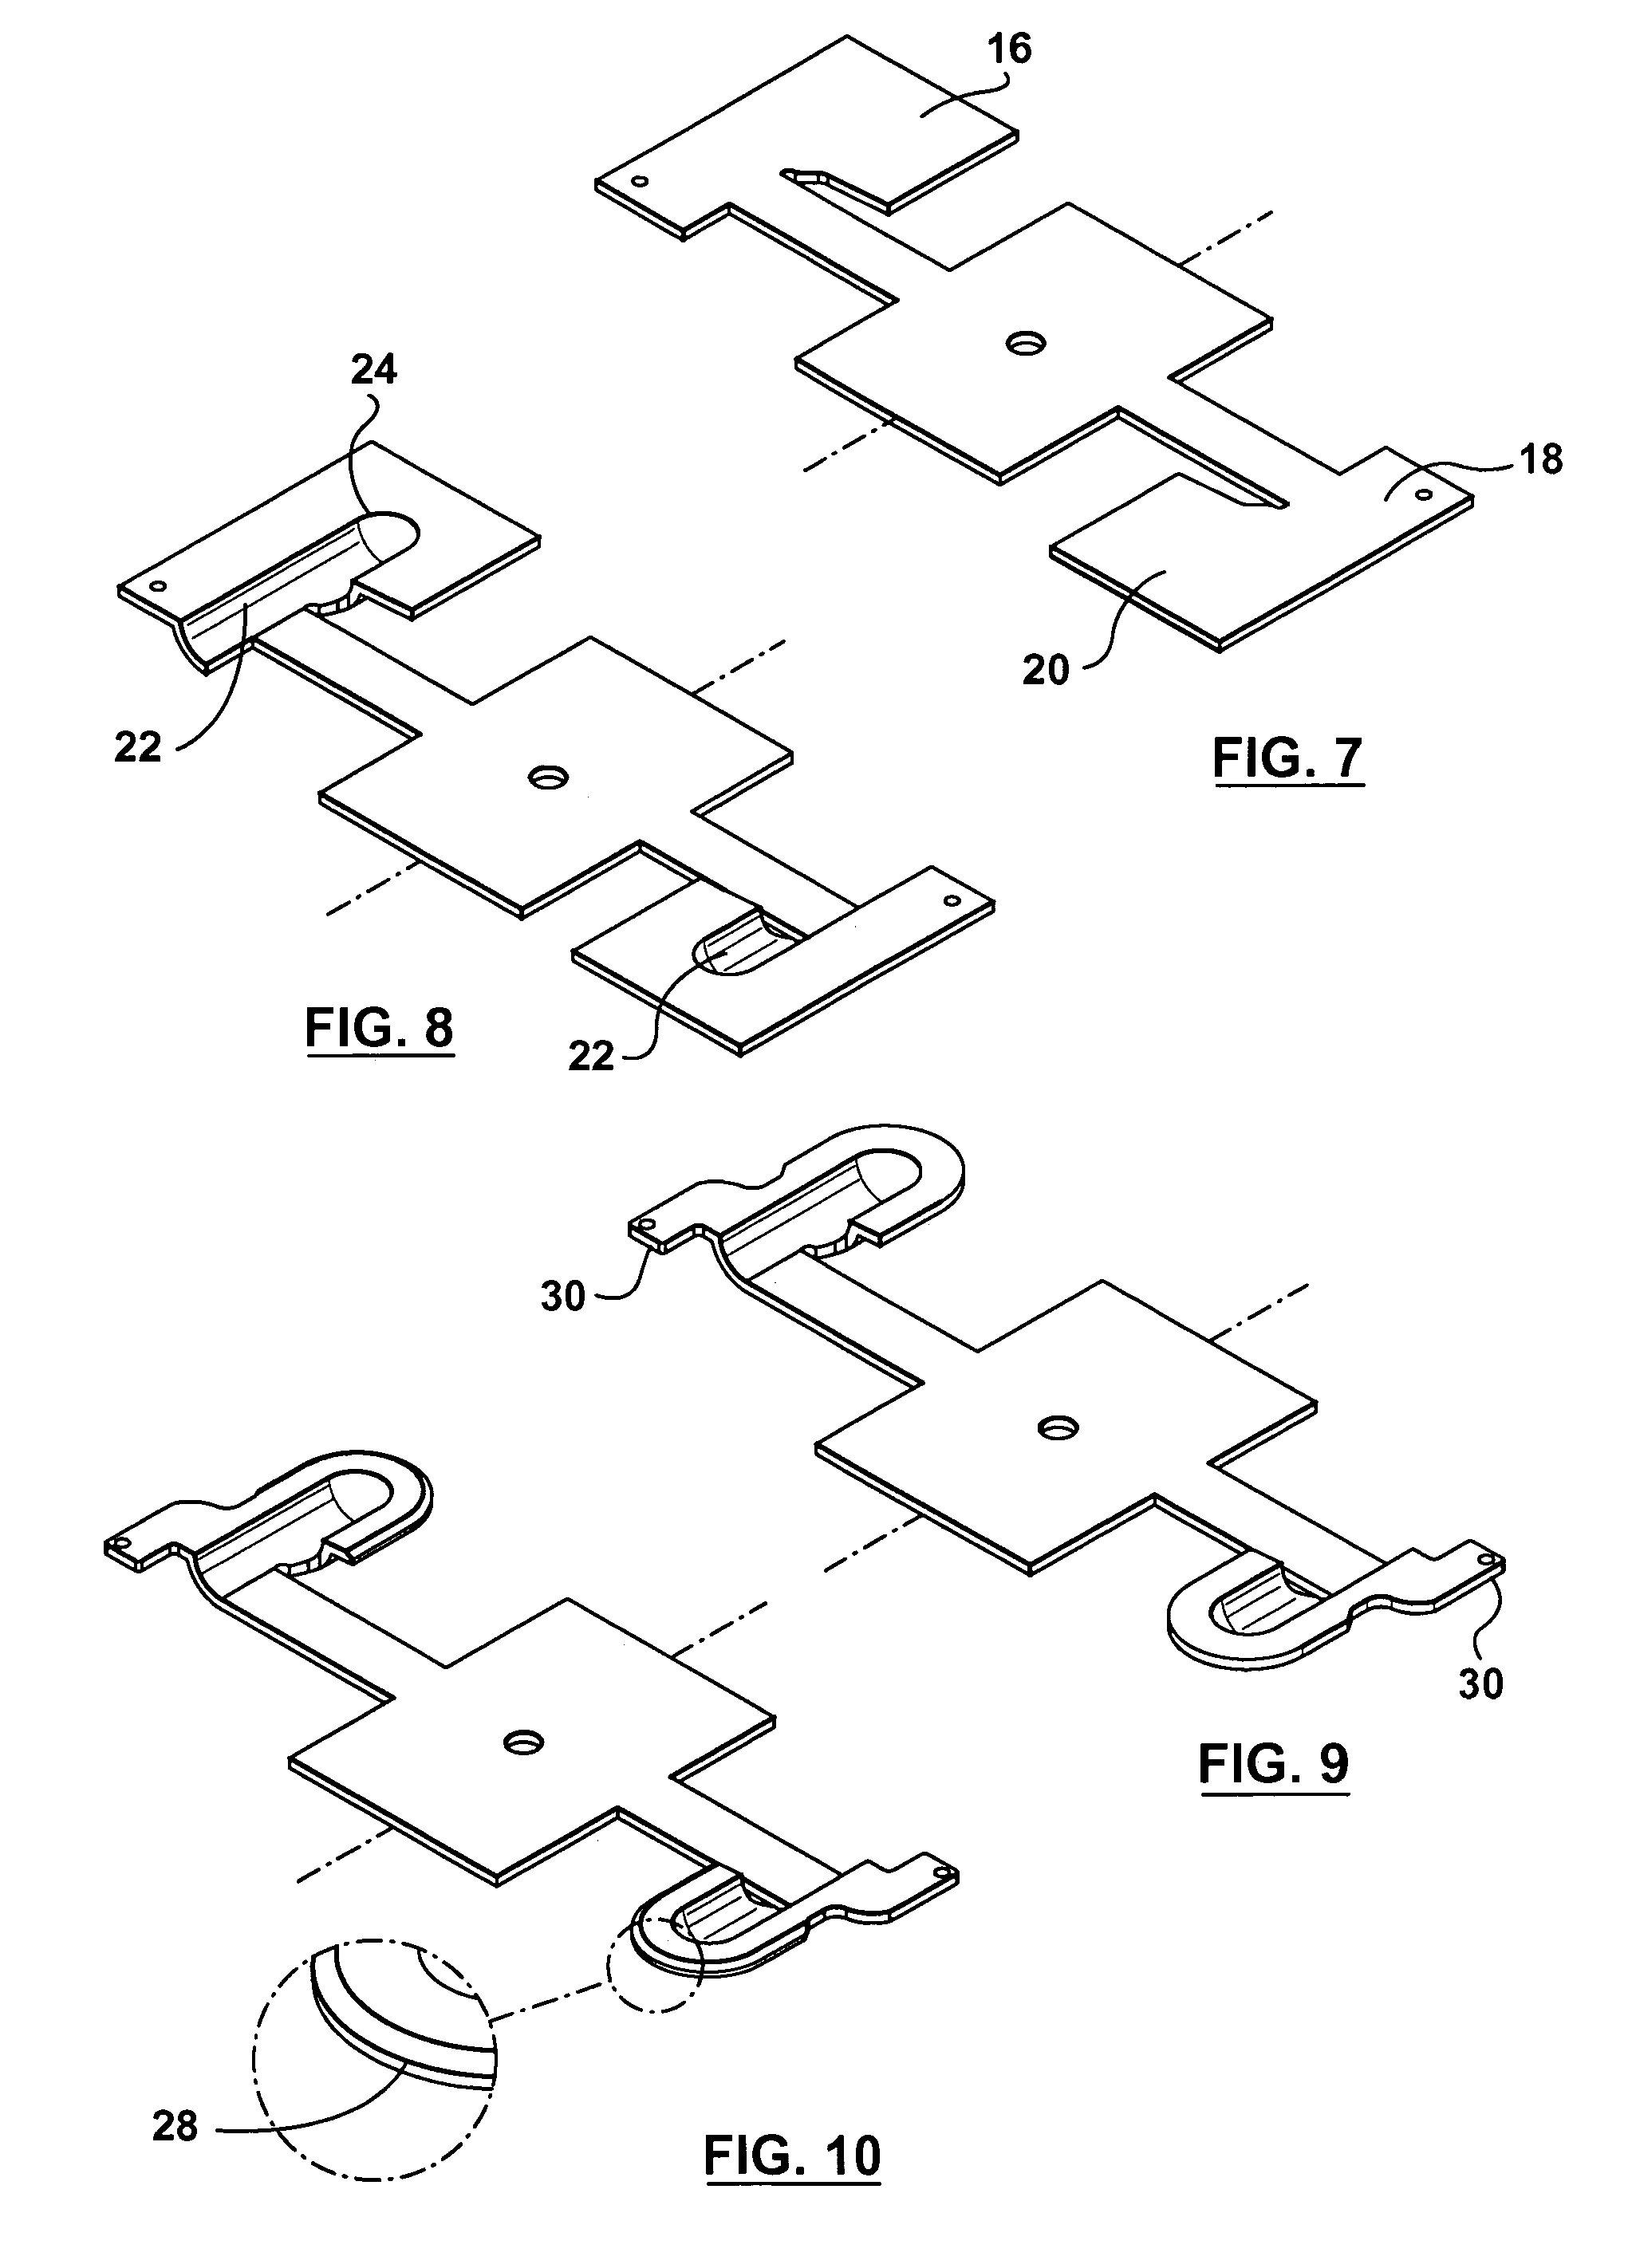 Method of manufacturing a stamped biopsy forceps jaw